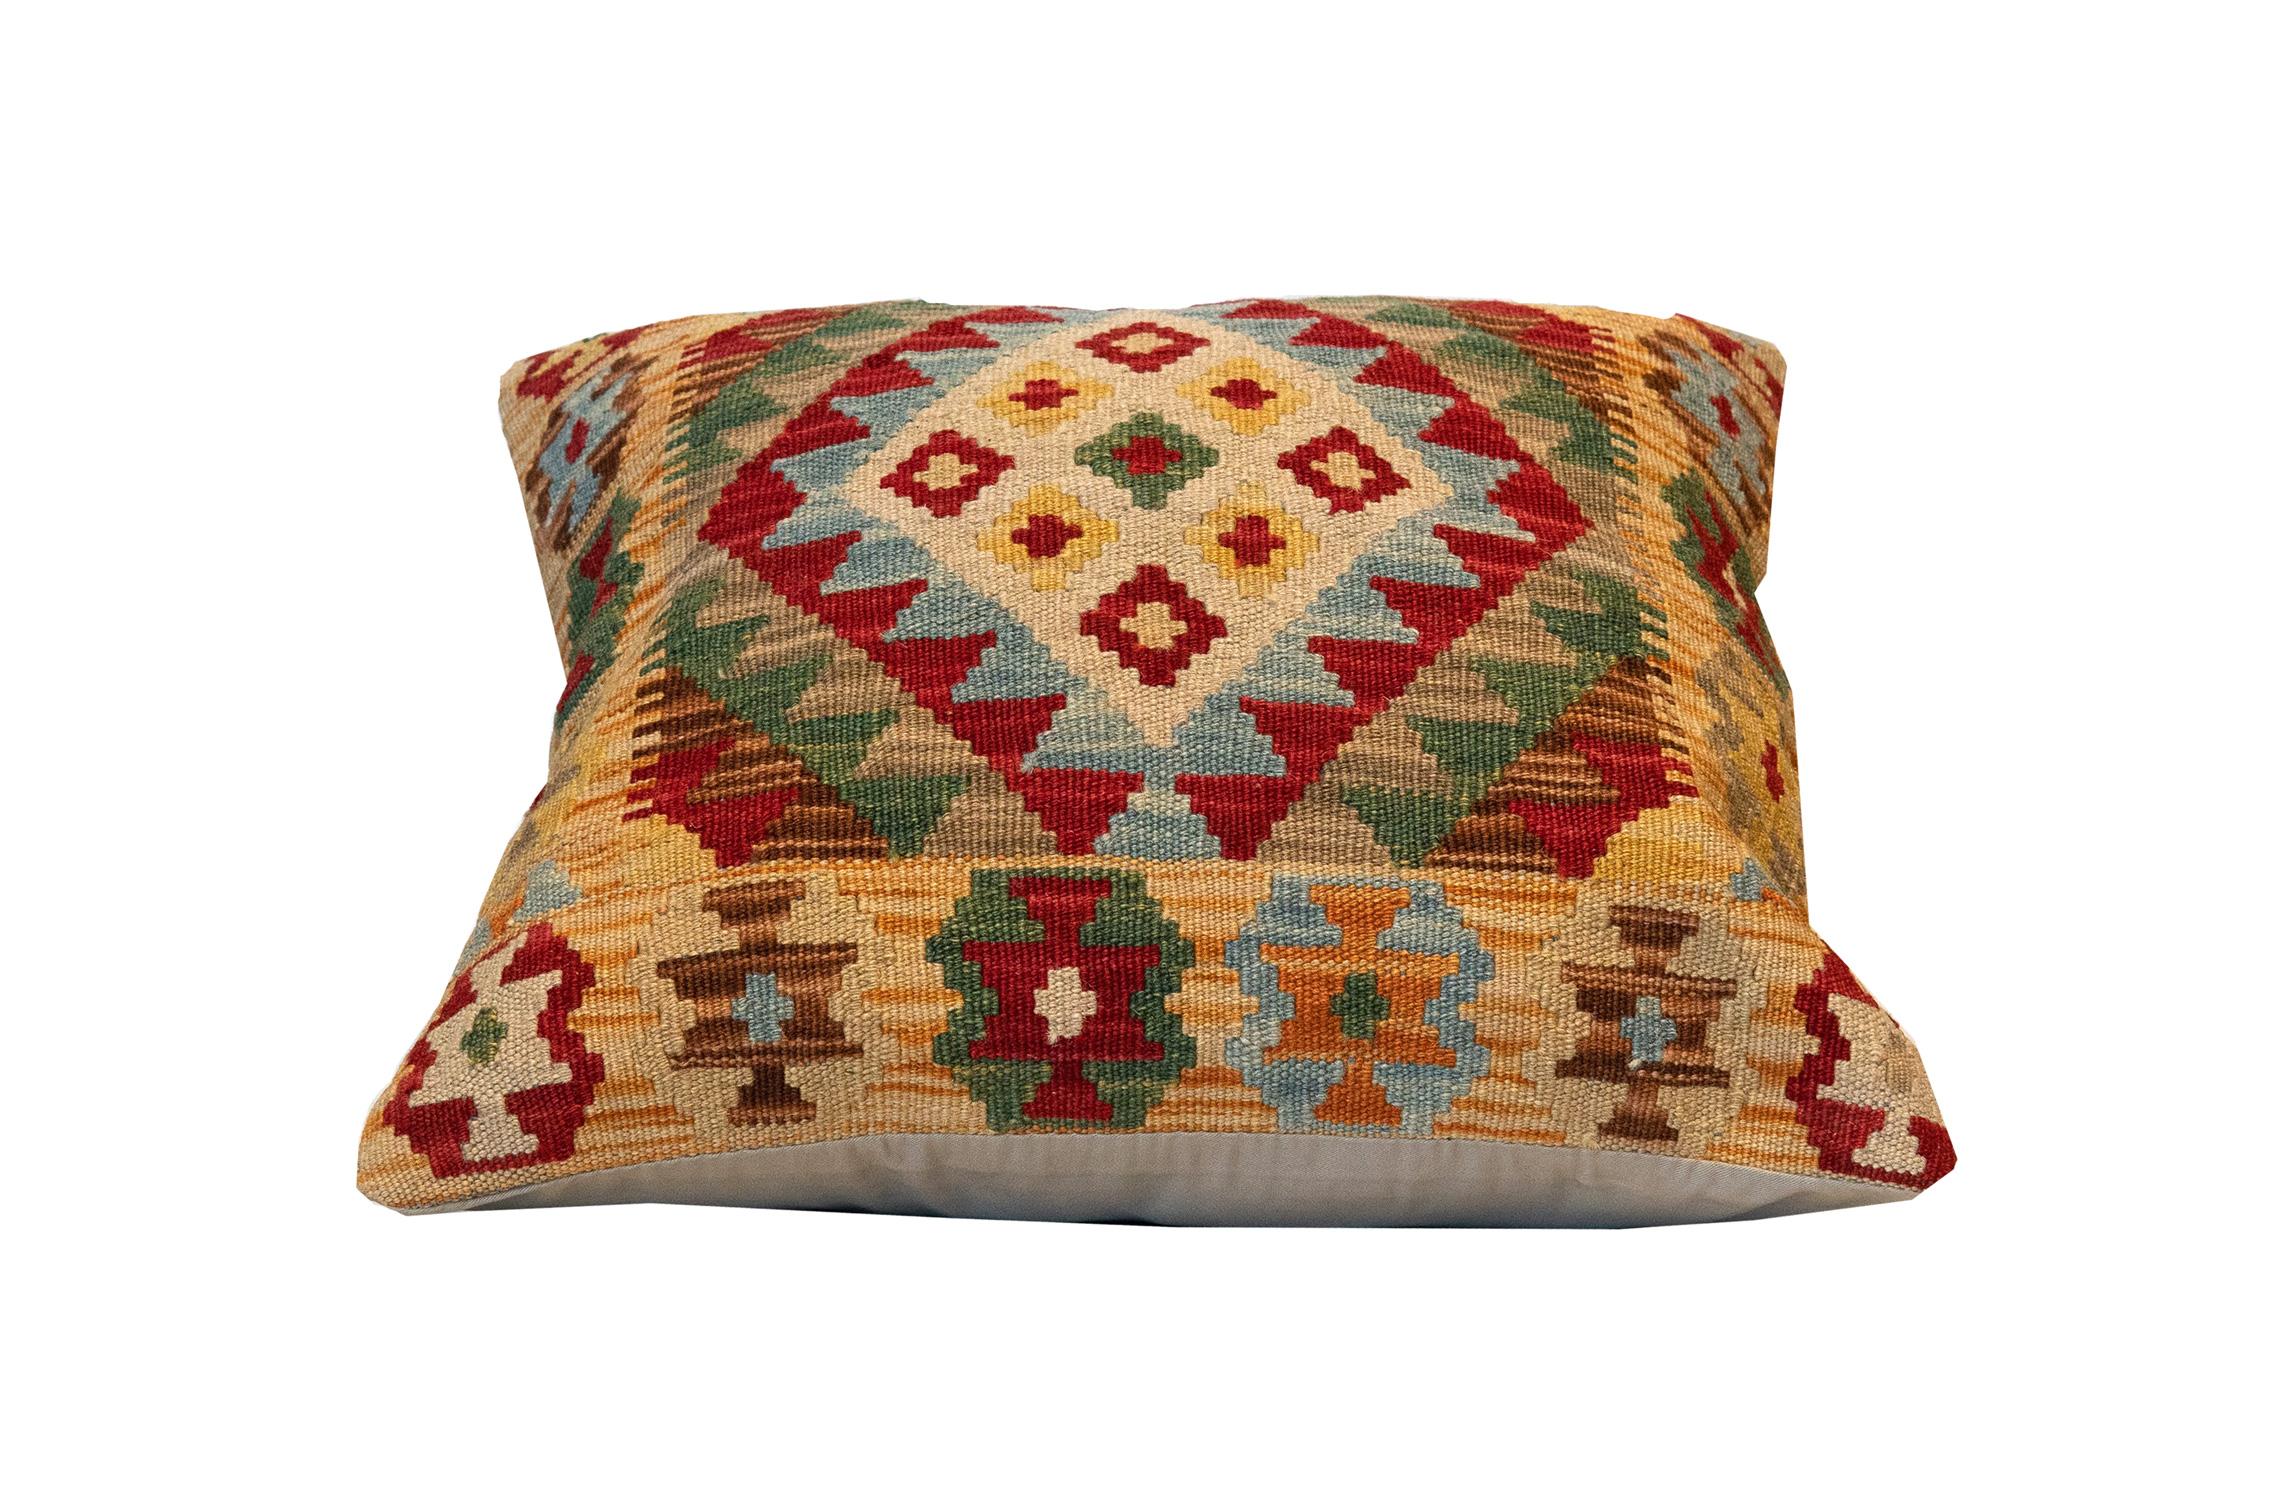 Cotton Wool Geometric Pillow Traditional Kilim Cushion Cover Handwoven Beige Green